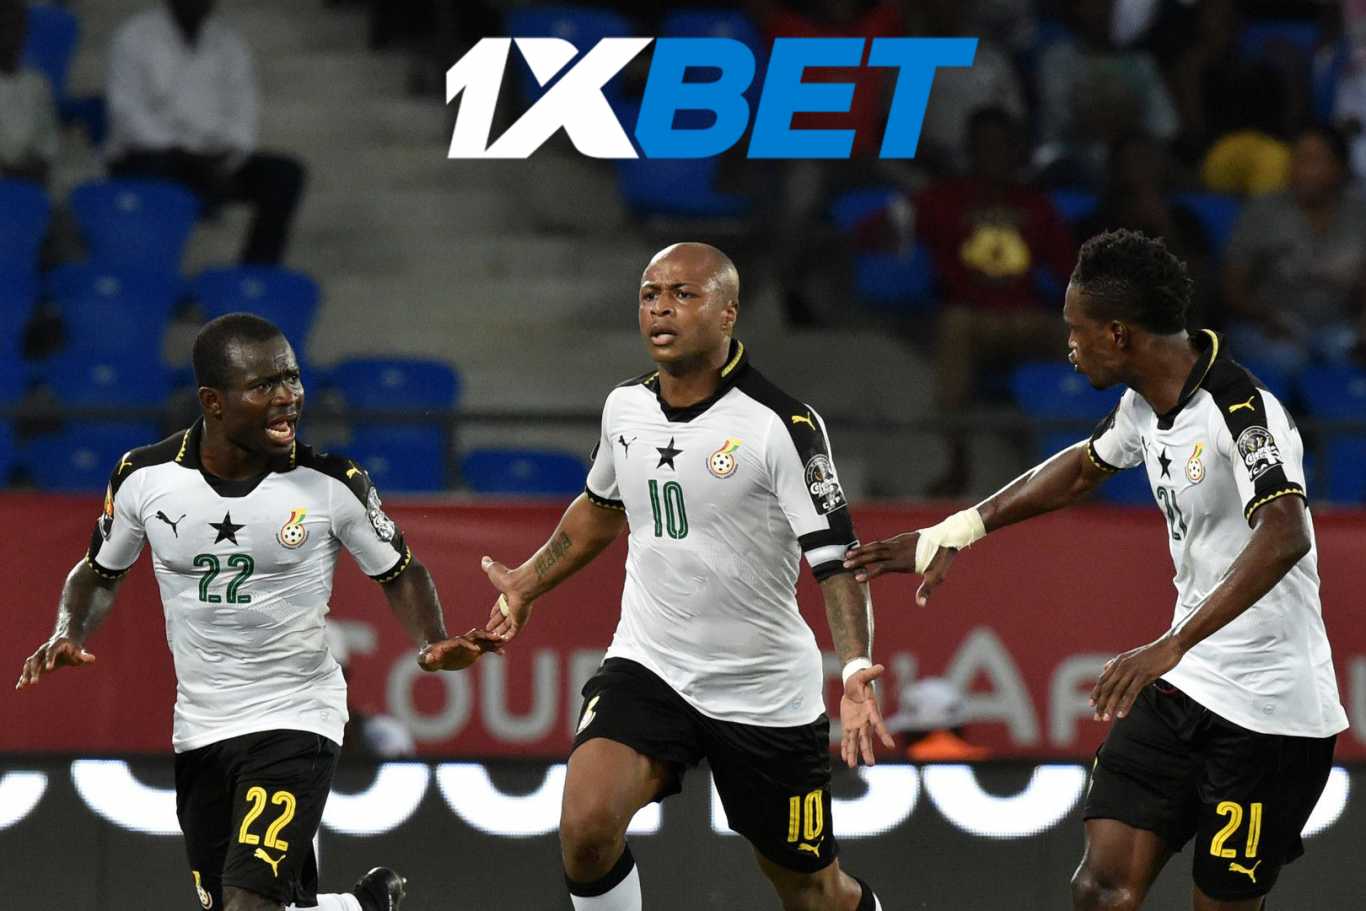 1xBet Payment Methods for Ghana